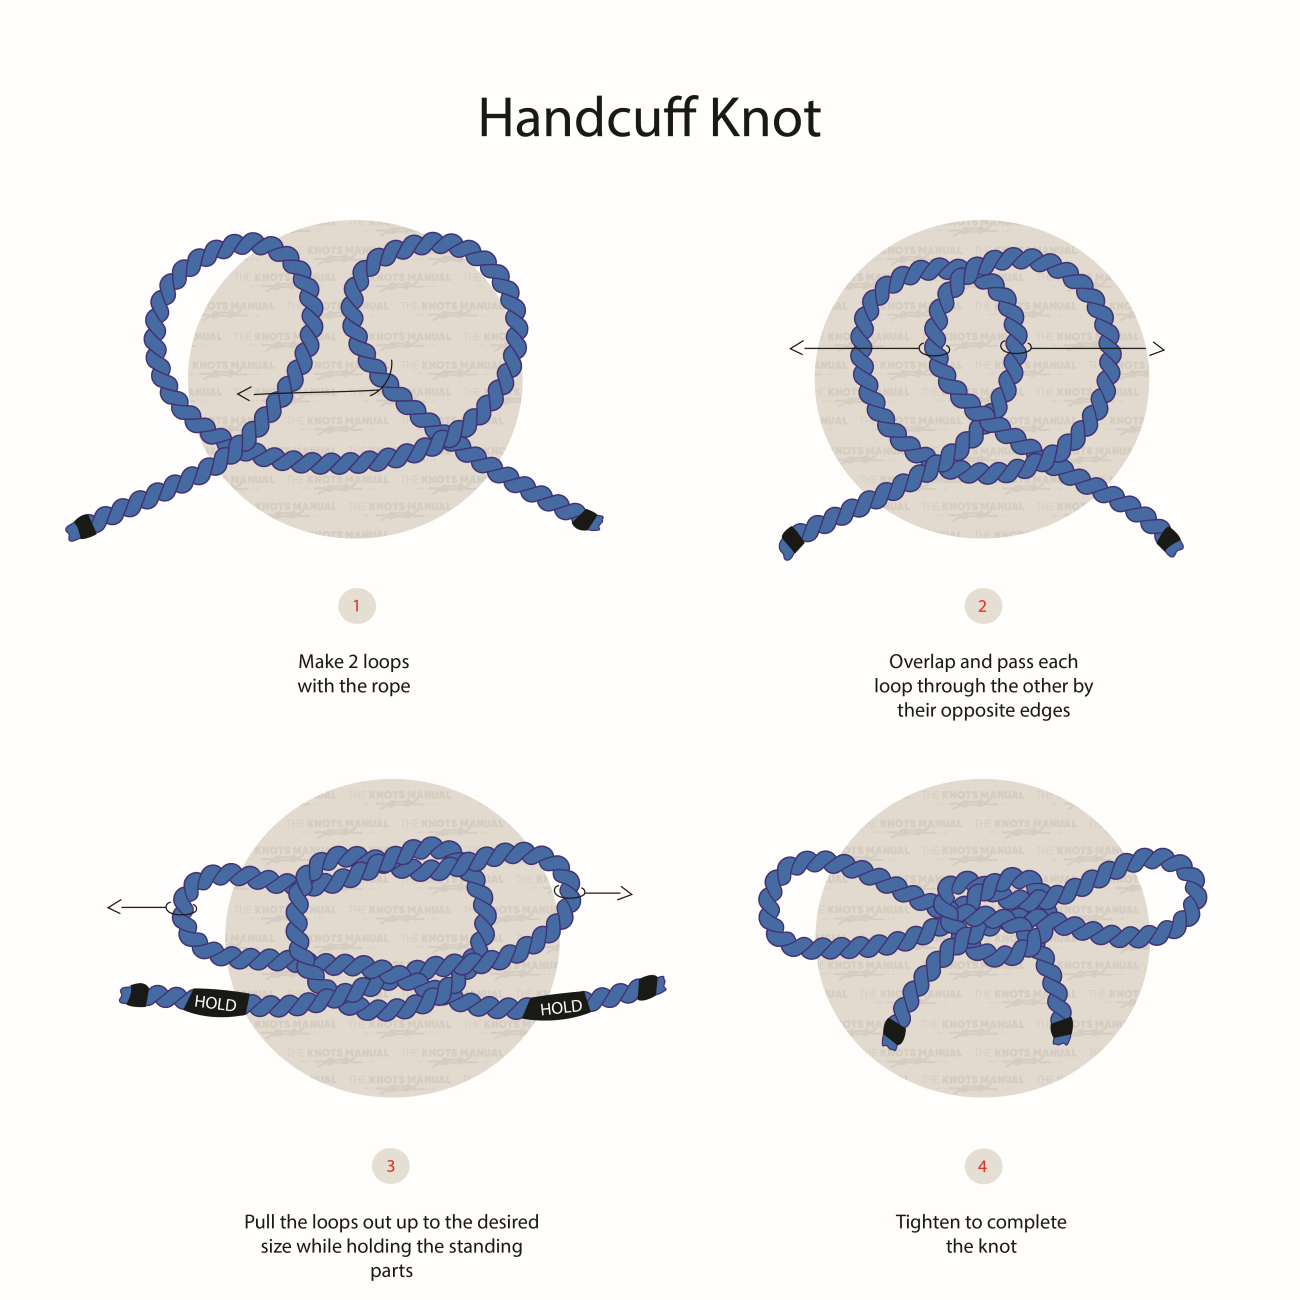 Handcuff Knot - Step By Step